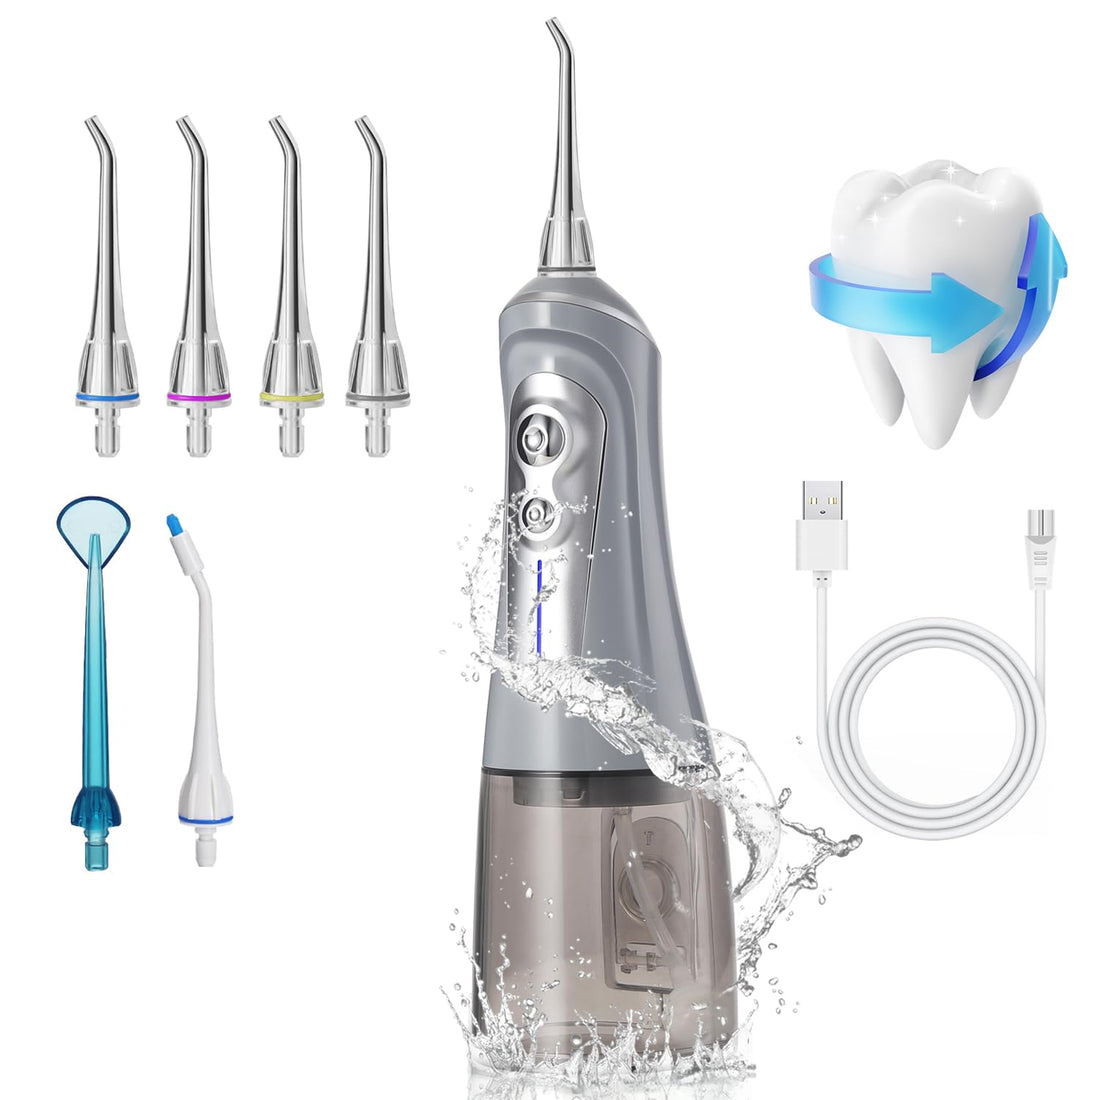 Warer Flosr for Teeth Cleaning Cordless, Portable Oral Irrigator Power Water Pick with 6 Pressure Mode 320ML USB Rechargeable for Oral Heath